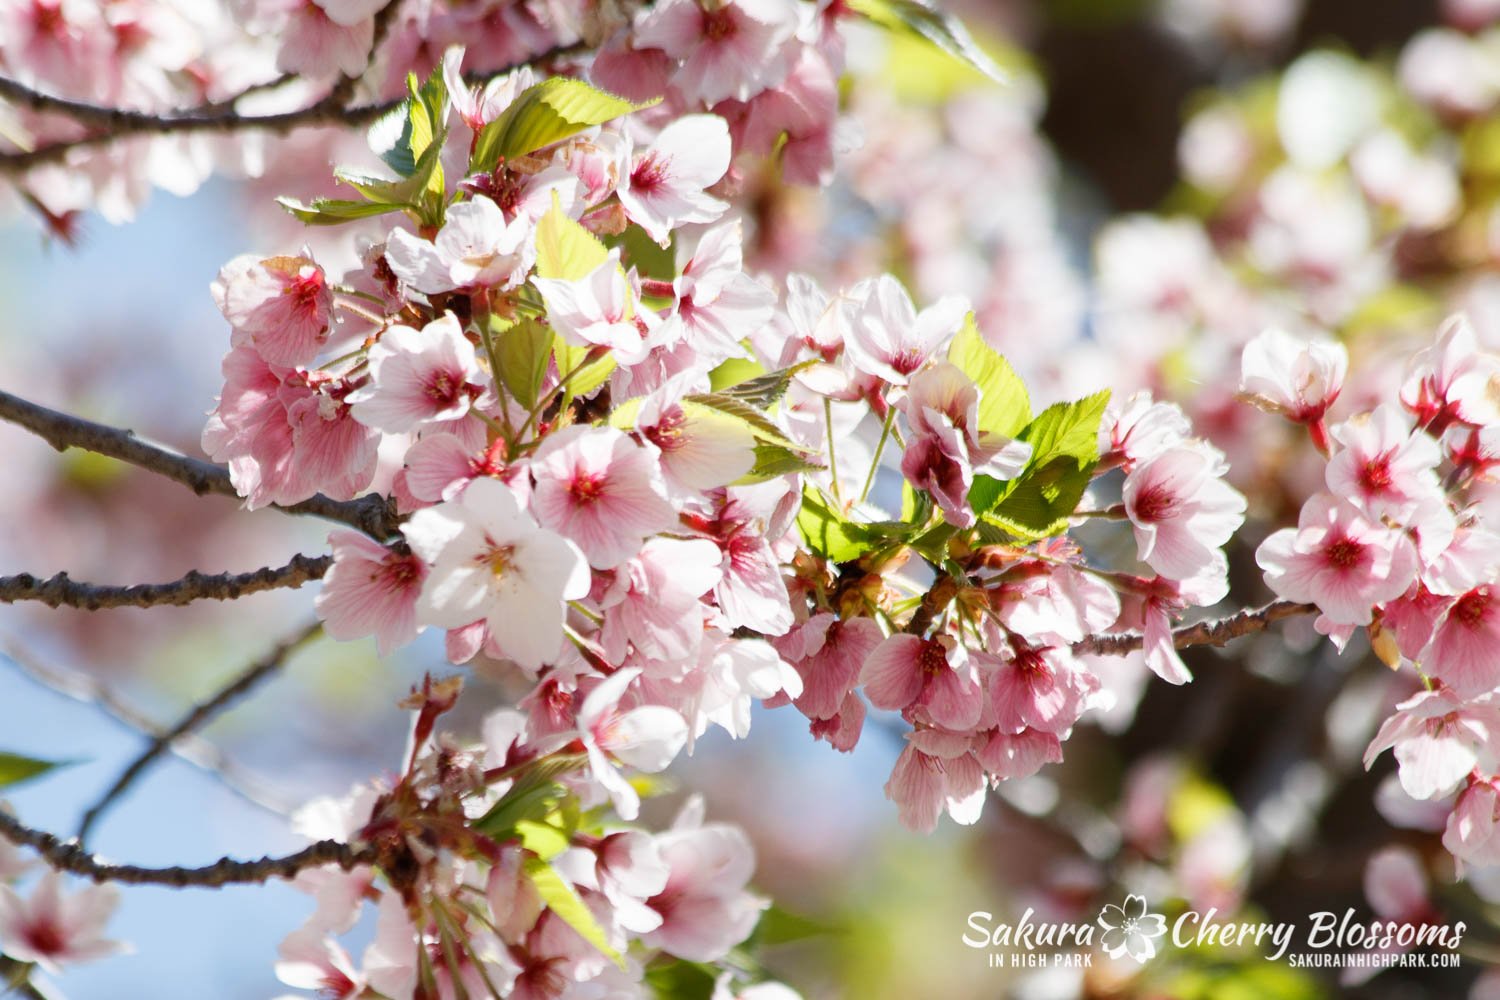 Cherry blossoms are in full bloom around Queens –